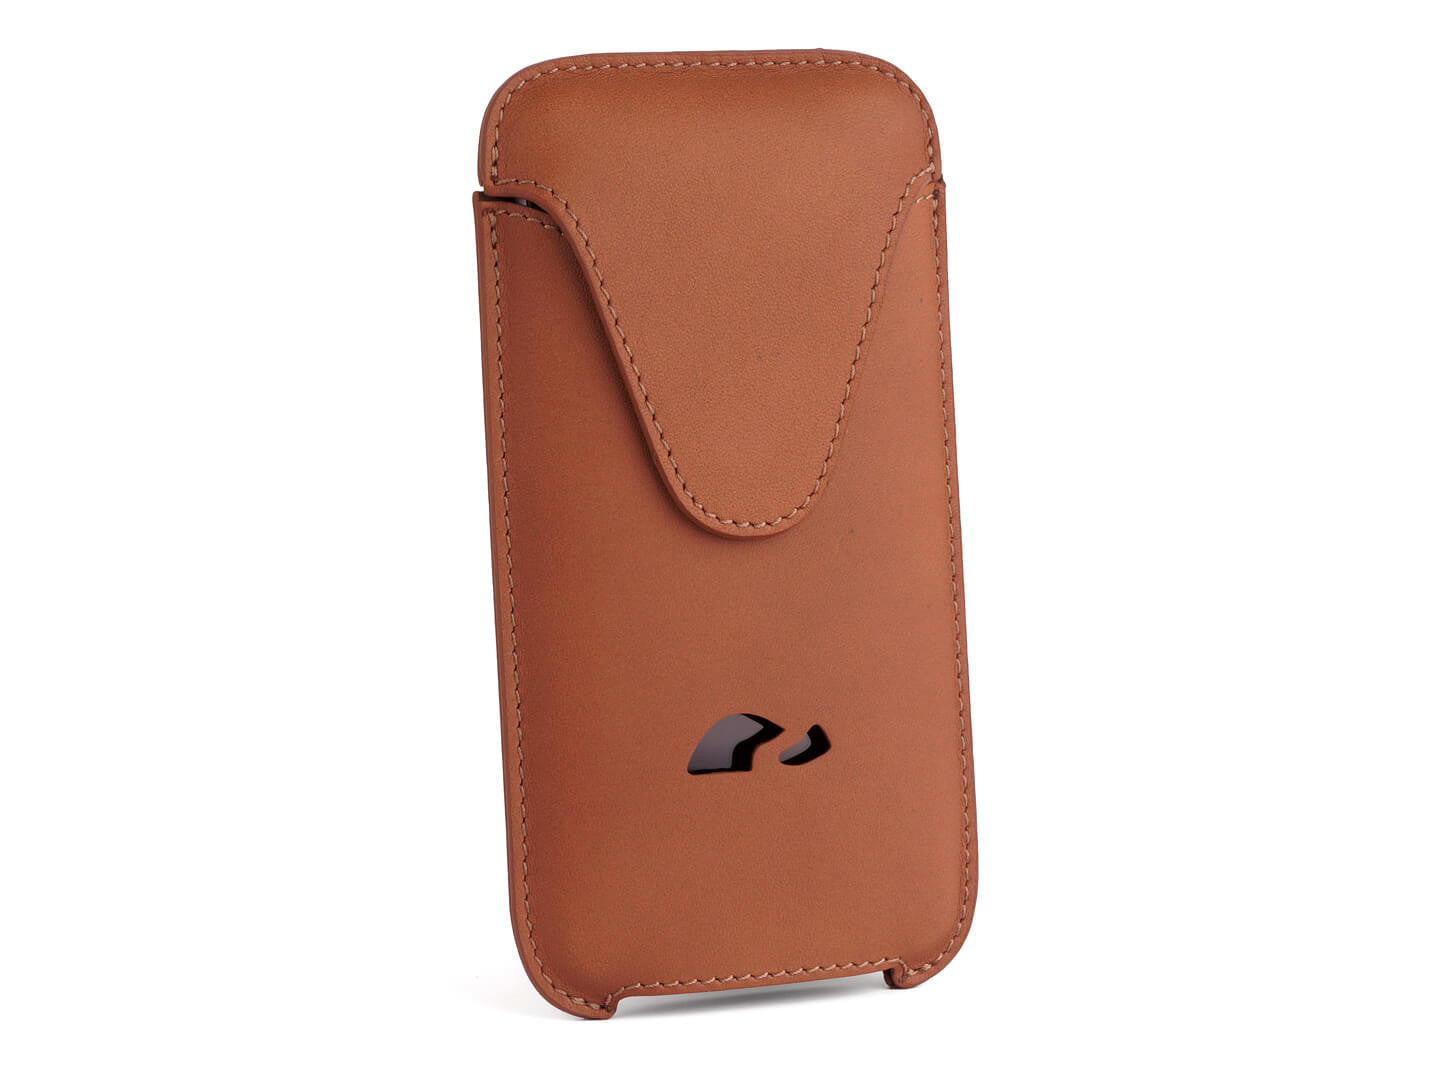 iPhone XS Max / 6 - 7- 8 Plus leather pouch sleeve protective slim case - natural leather veg-tan - Carapaz